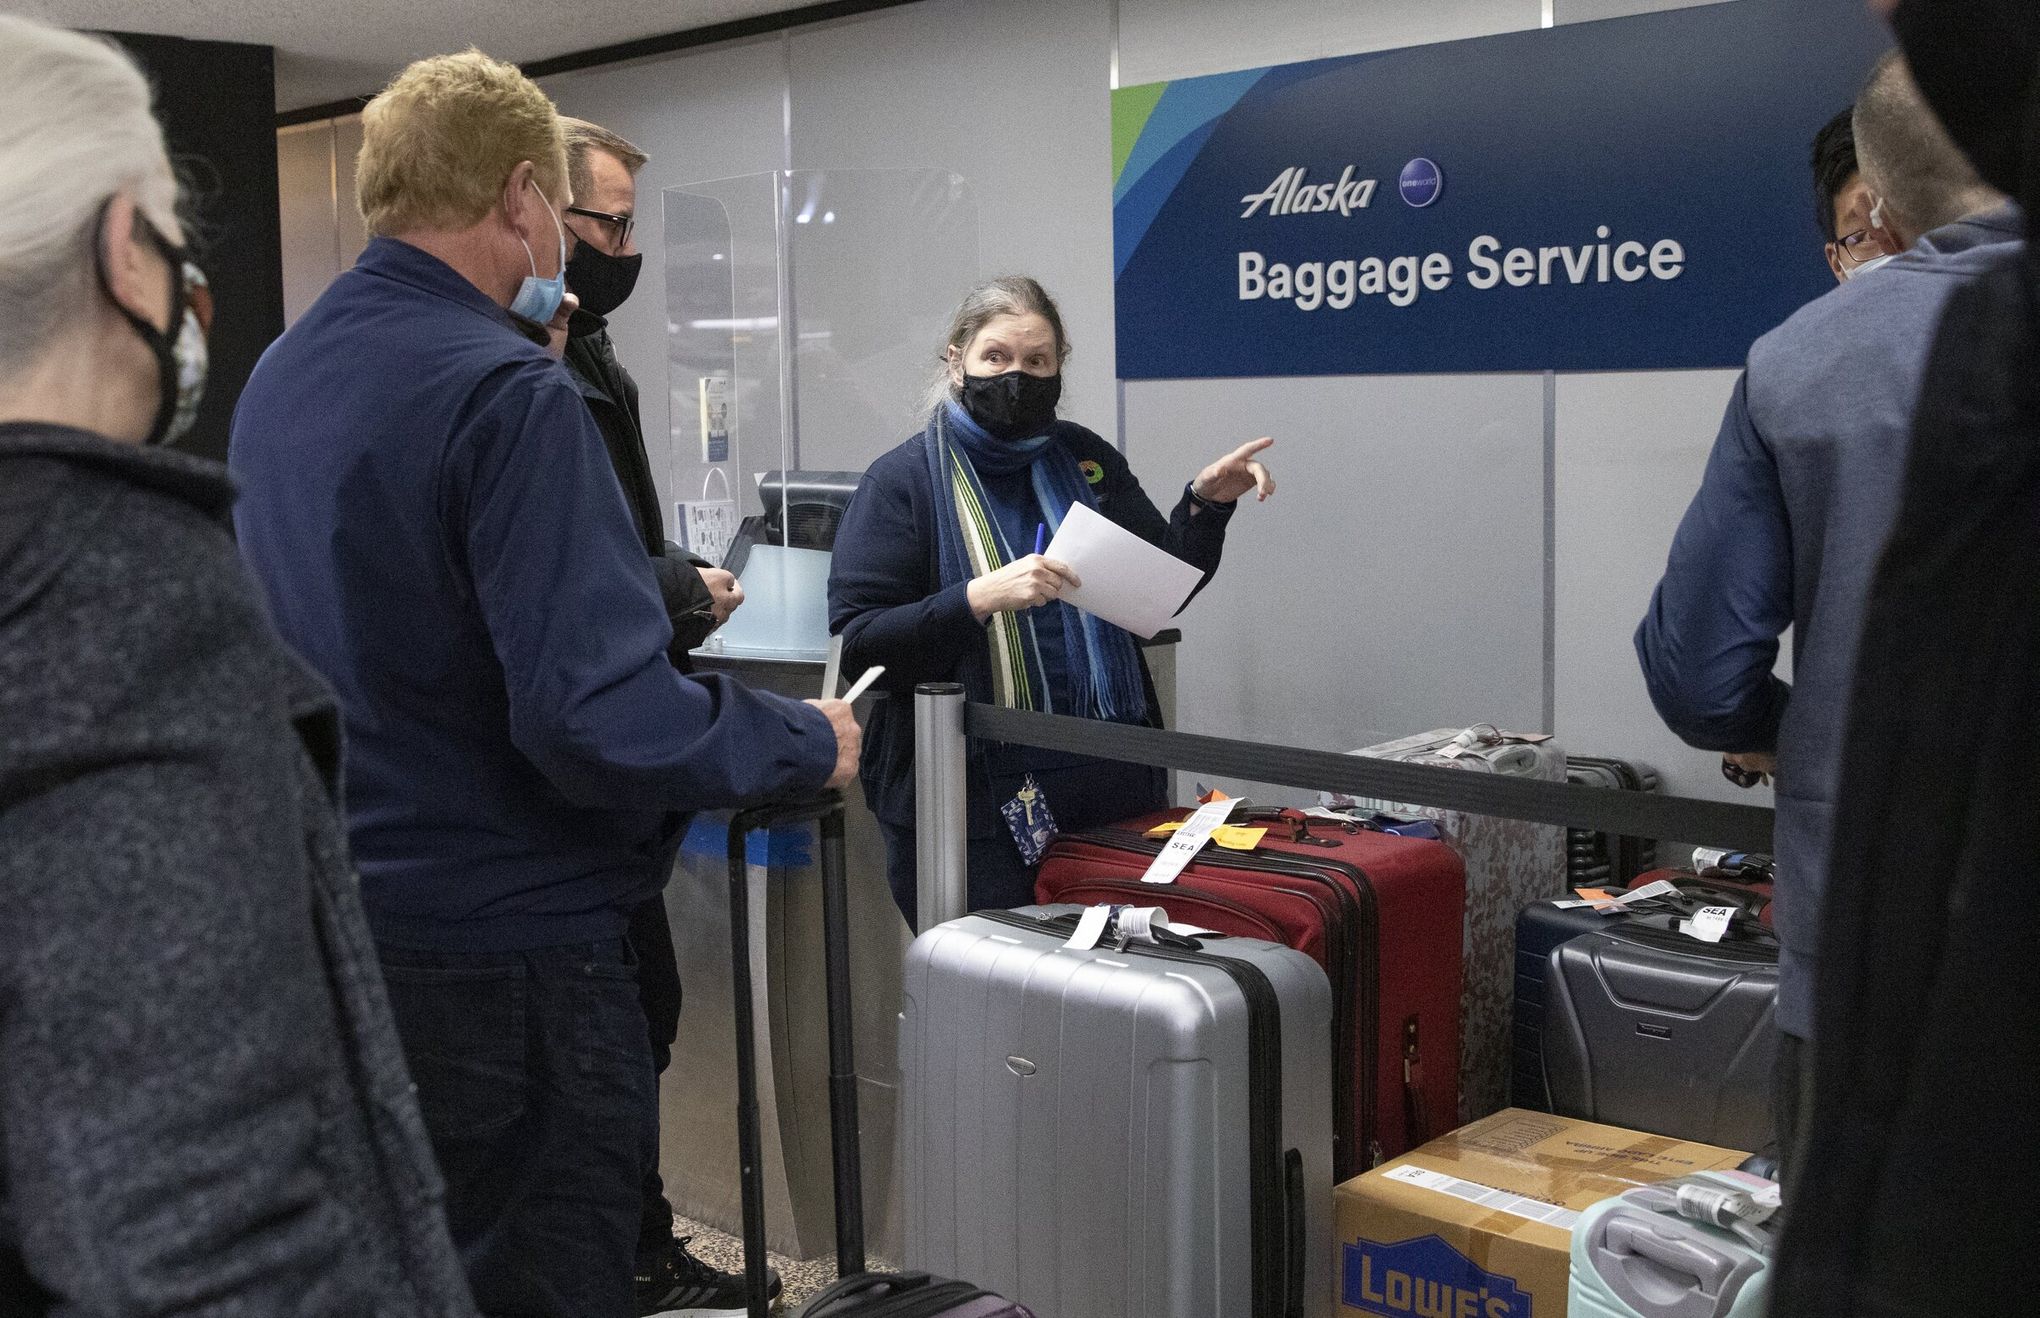 The Truth About Airline Lost Luggage and What to Do